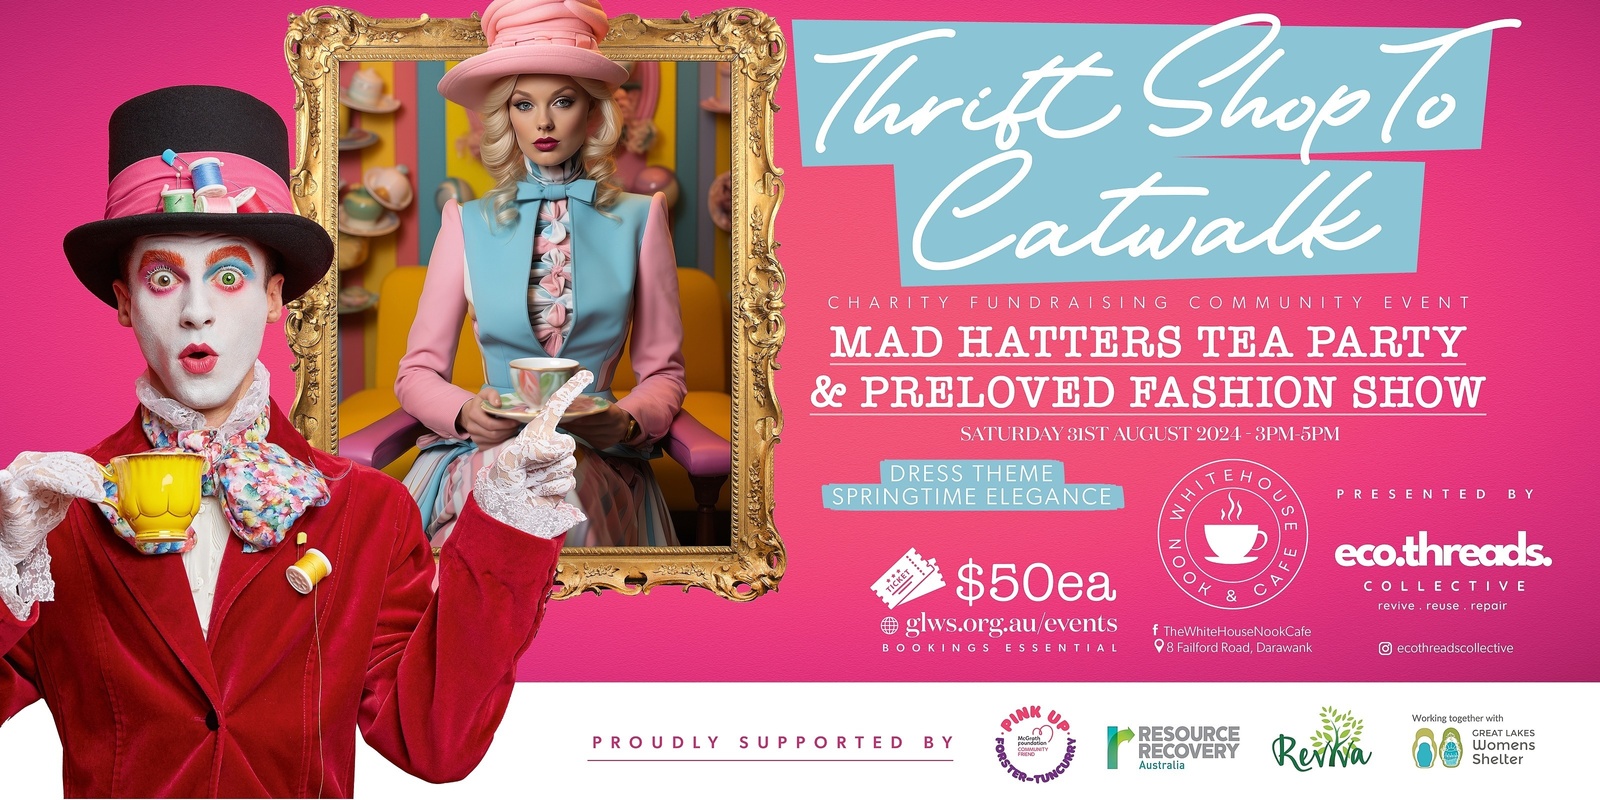 Banner image for Thrift Shop to Catwalk - Charity Fundraising Community Event 🎩 Mad Hatters Tea Party & Preloved Fashion Show 🌷